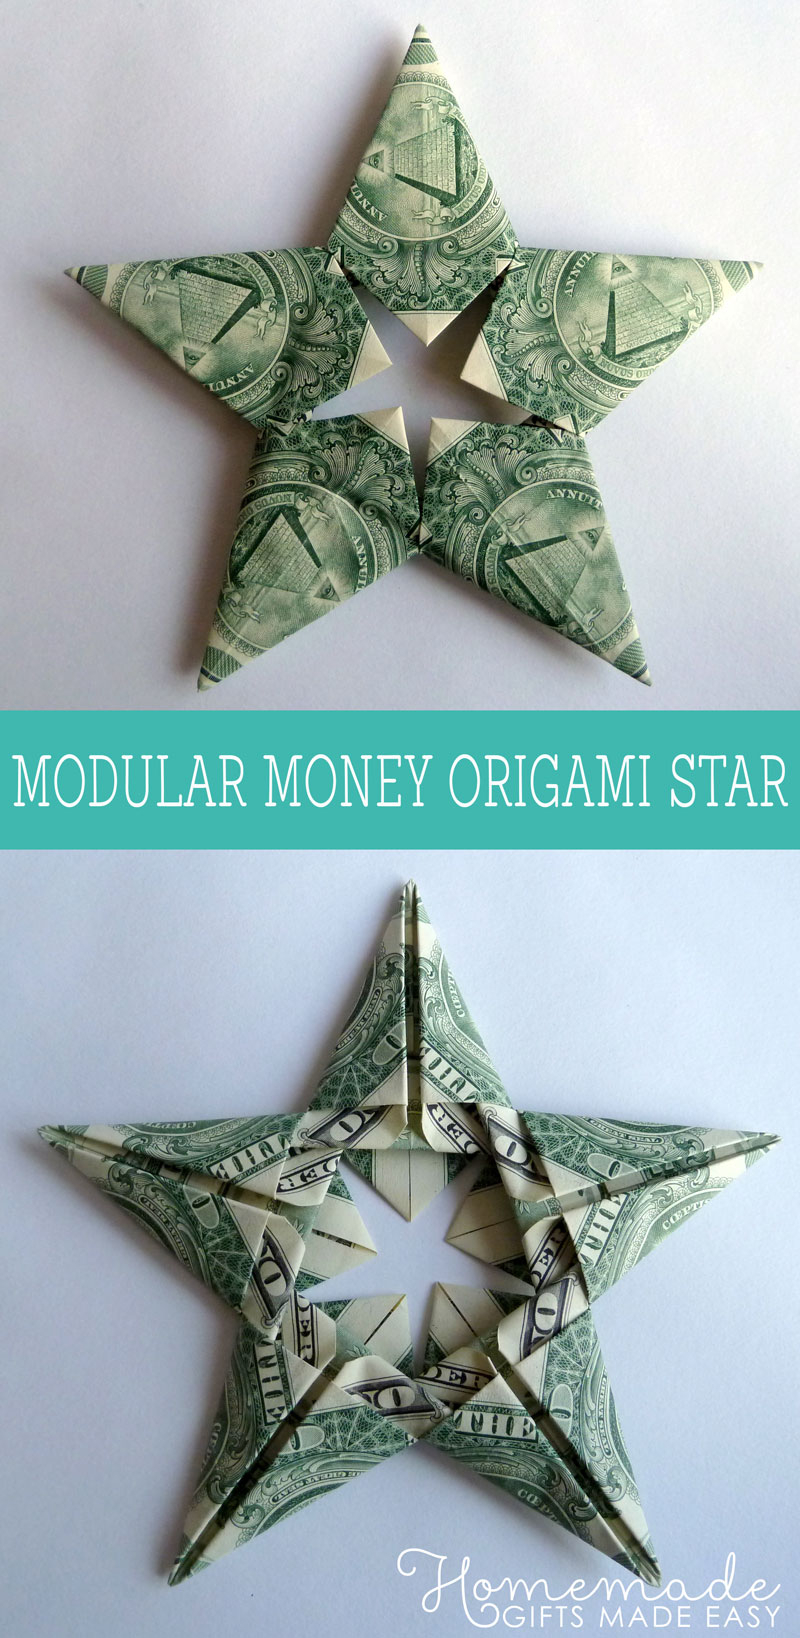 Easy Origami Star Modular Money Origami Star From 5 Bills How To Fold Step Step